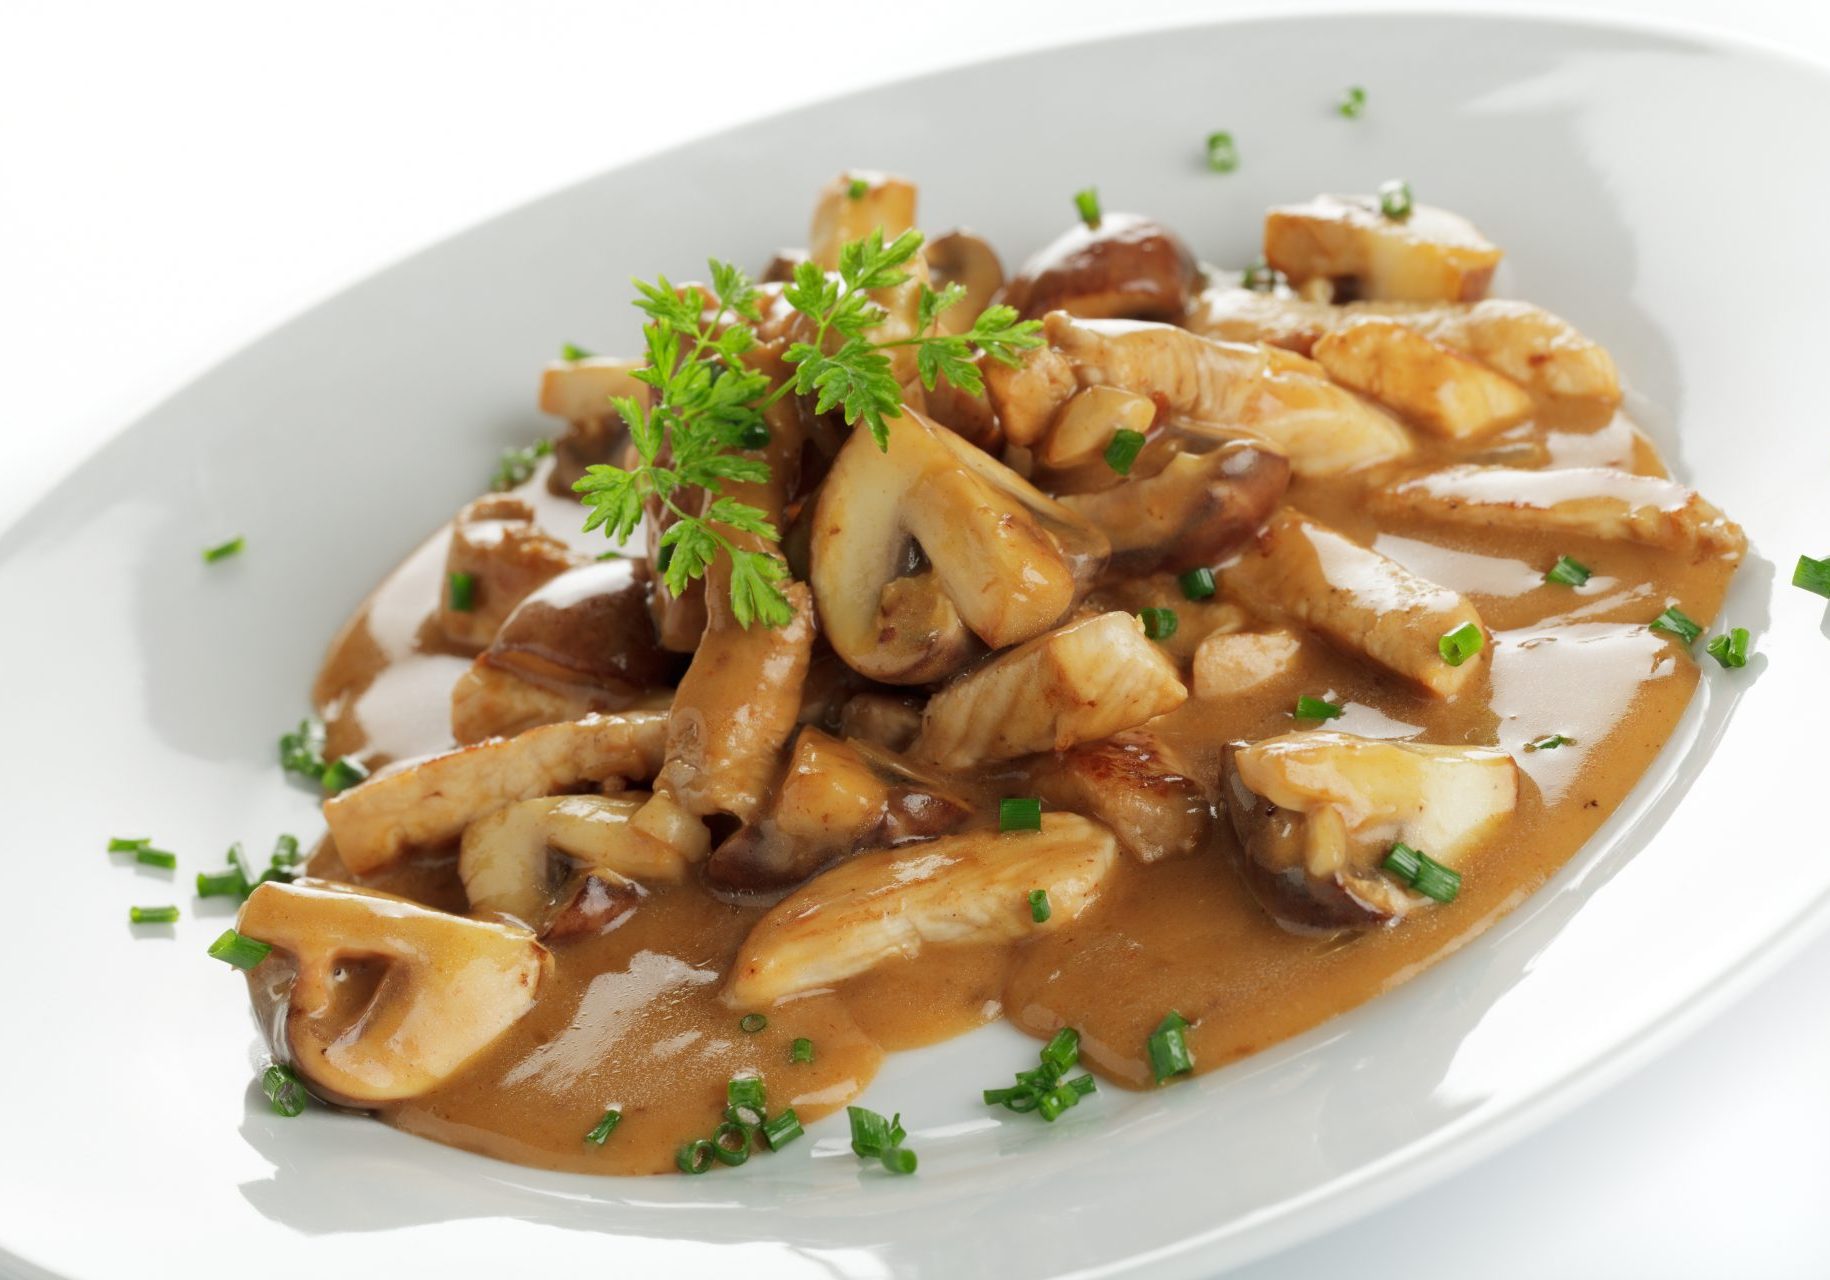 Mushrooms and meat stripes in brown sauce on a white plate